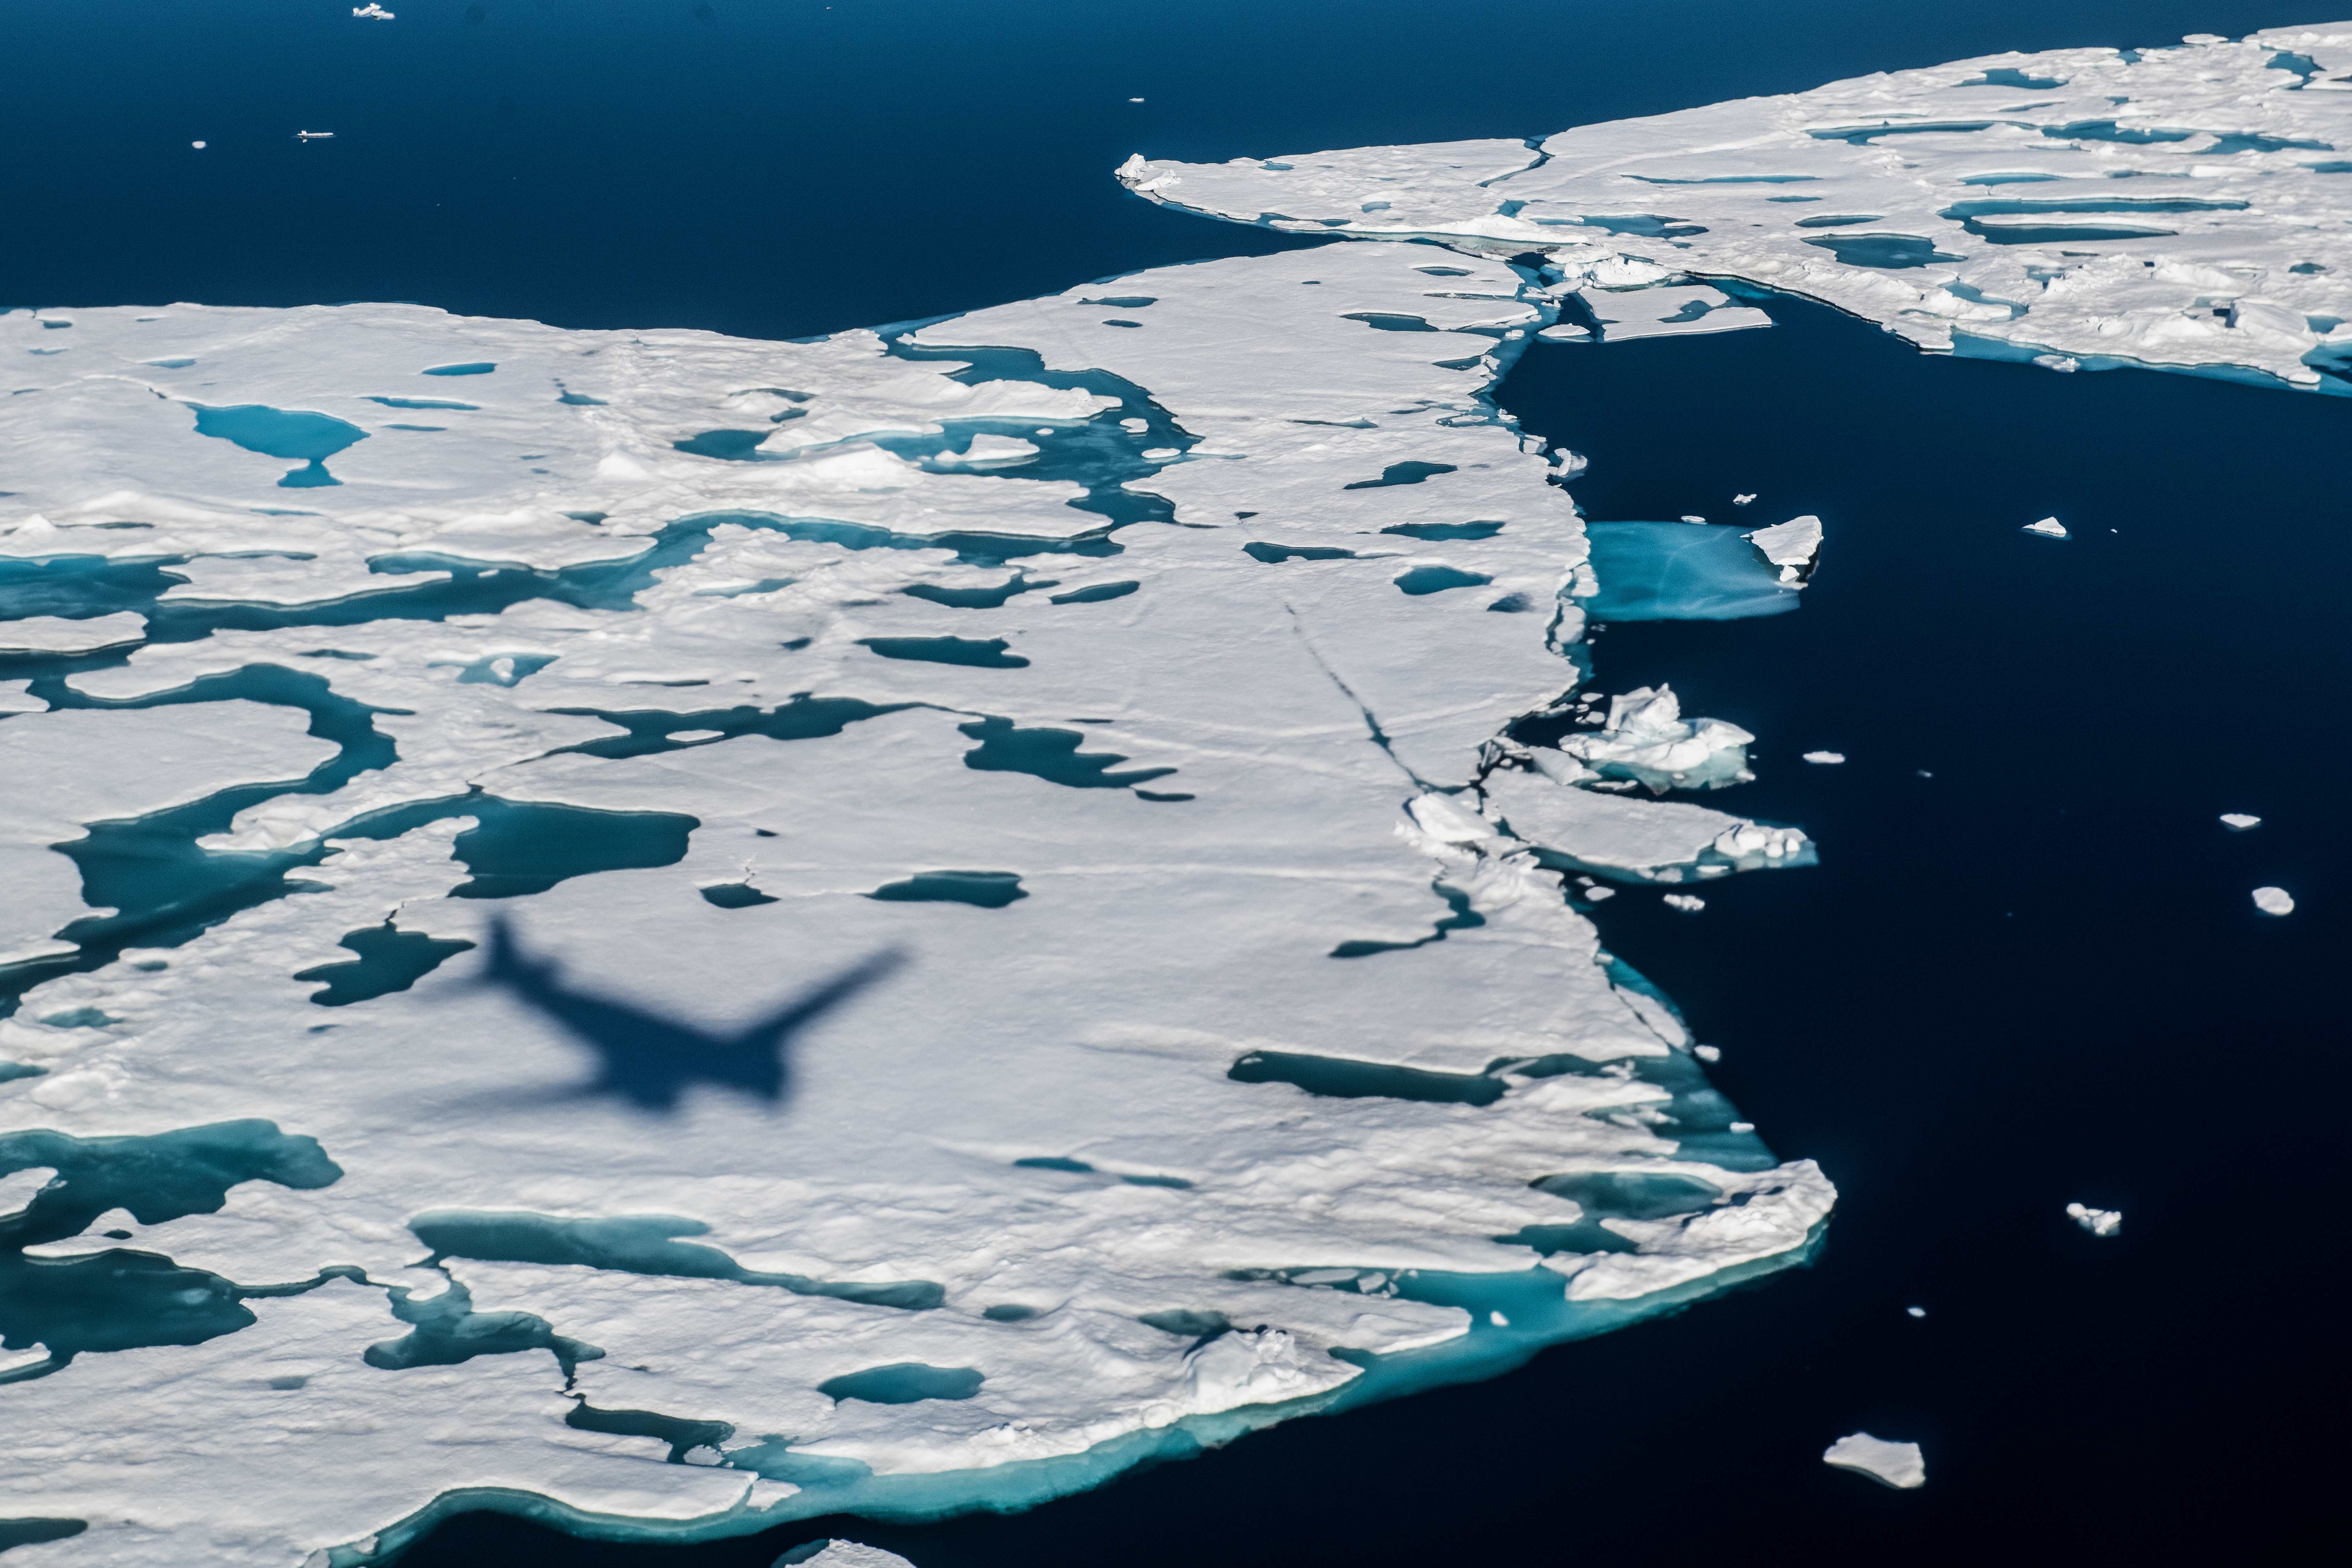 Melt ponds on Arctic sea ice photographed during the Alfred Wegener Institute’s airborne sea ice monitoring program called IceBird.